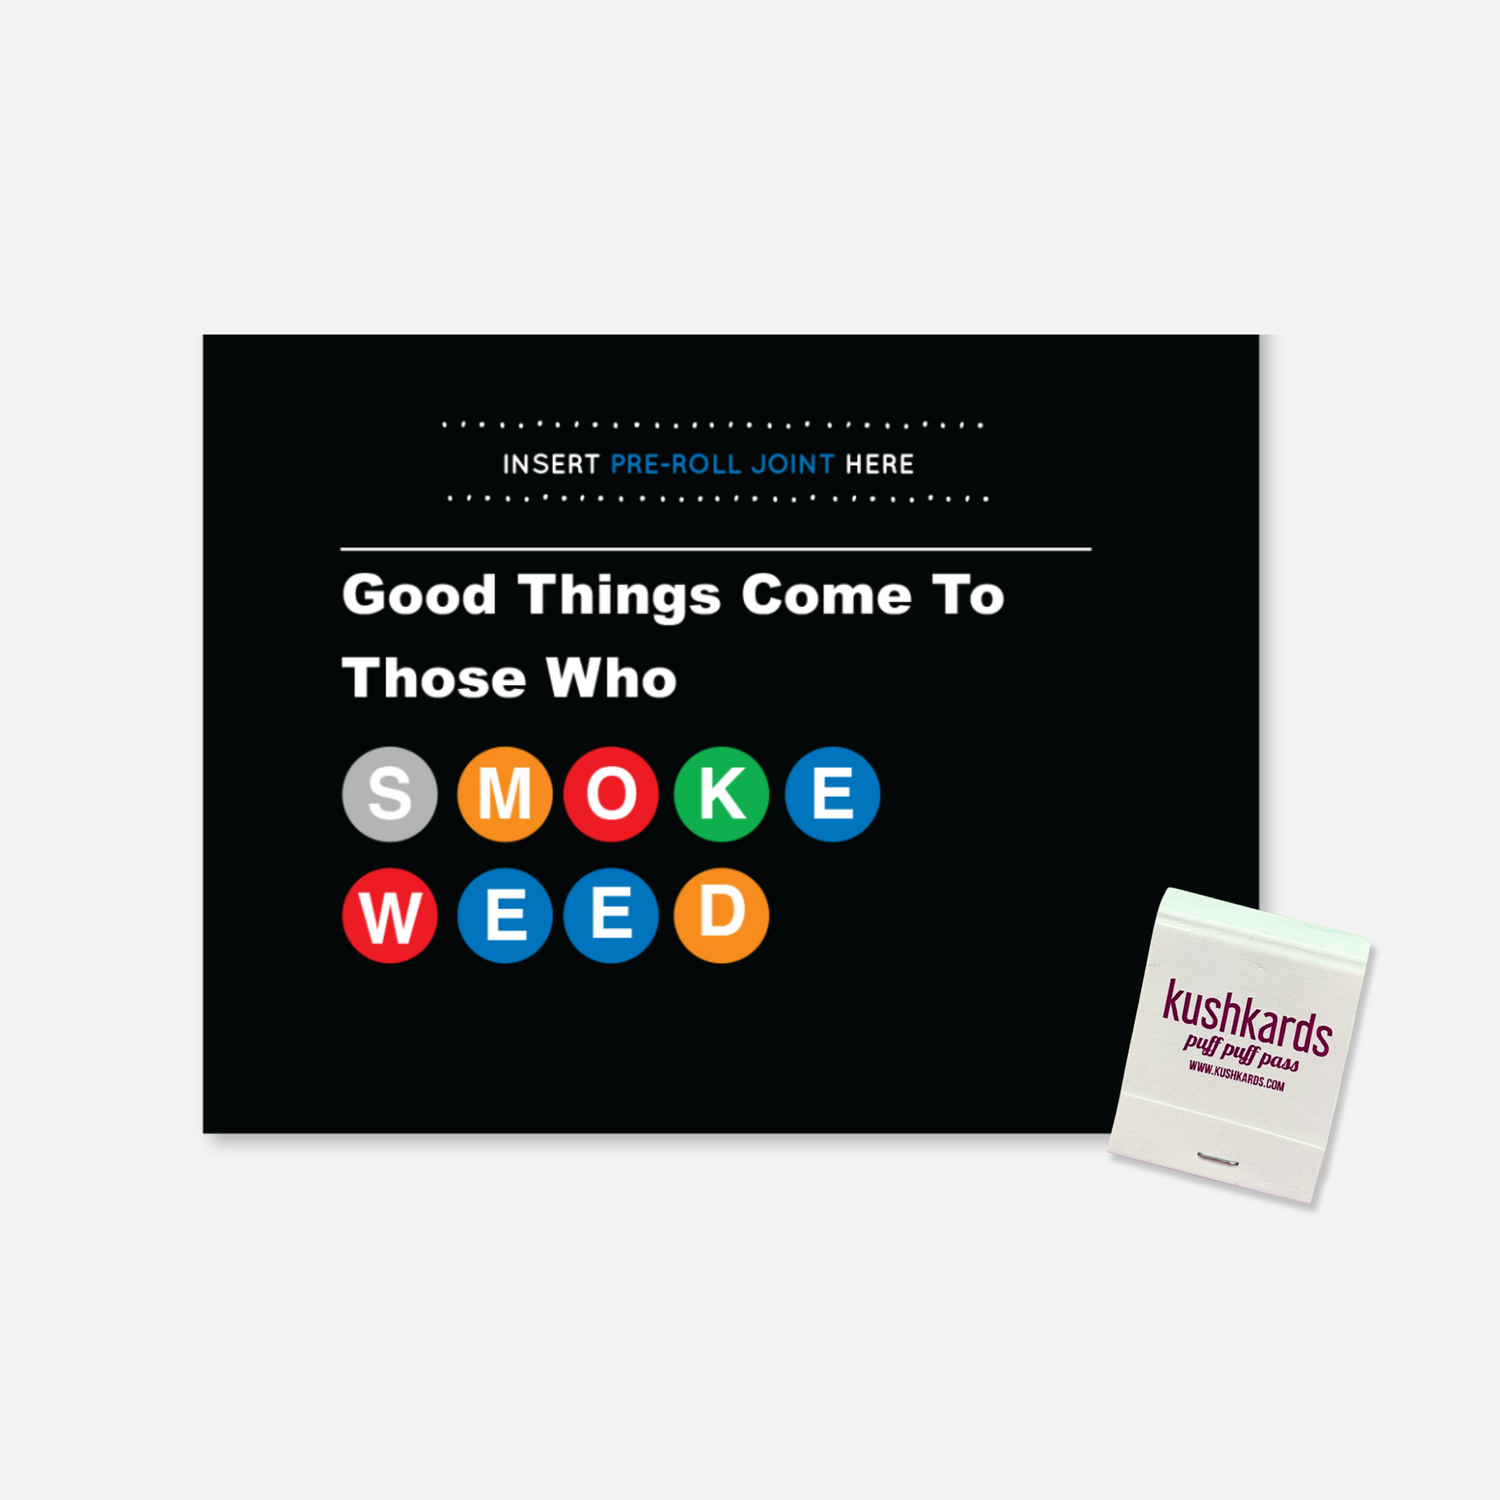 A greeting card featuring colorful subway letters spelling out &quot;SMOKE WEED&quot; with the text &quot;Good Things Come To Those Who SMOKE WEED&quot; on a black background.